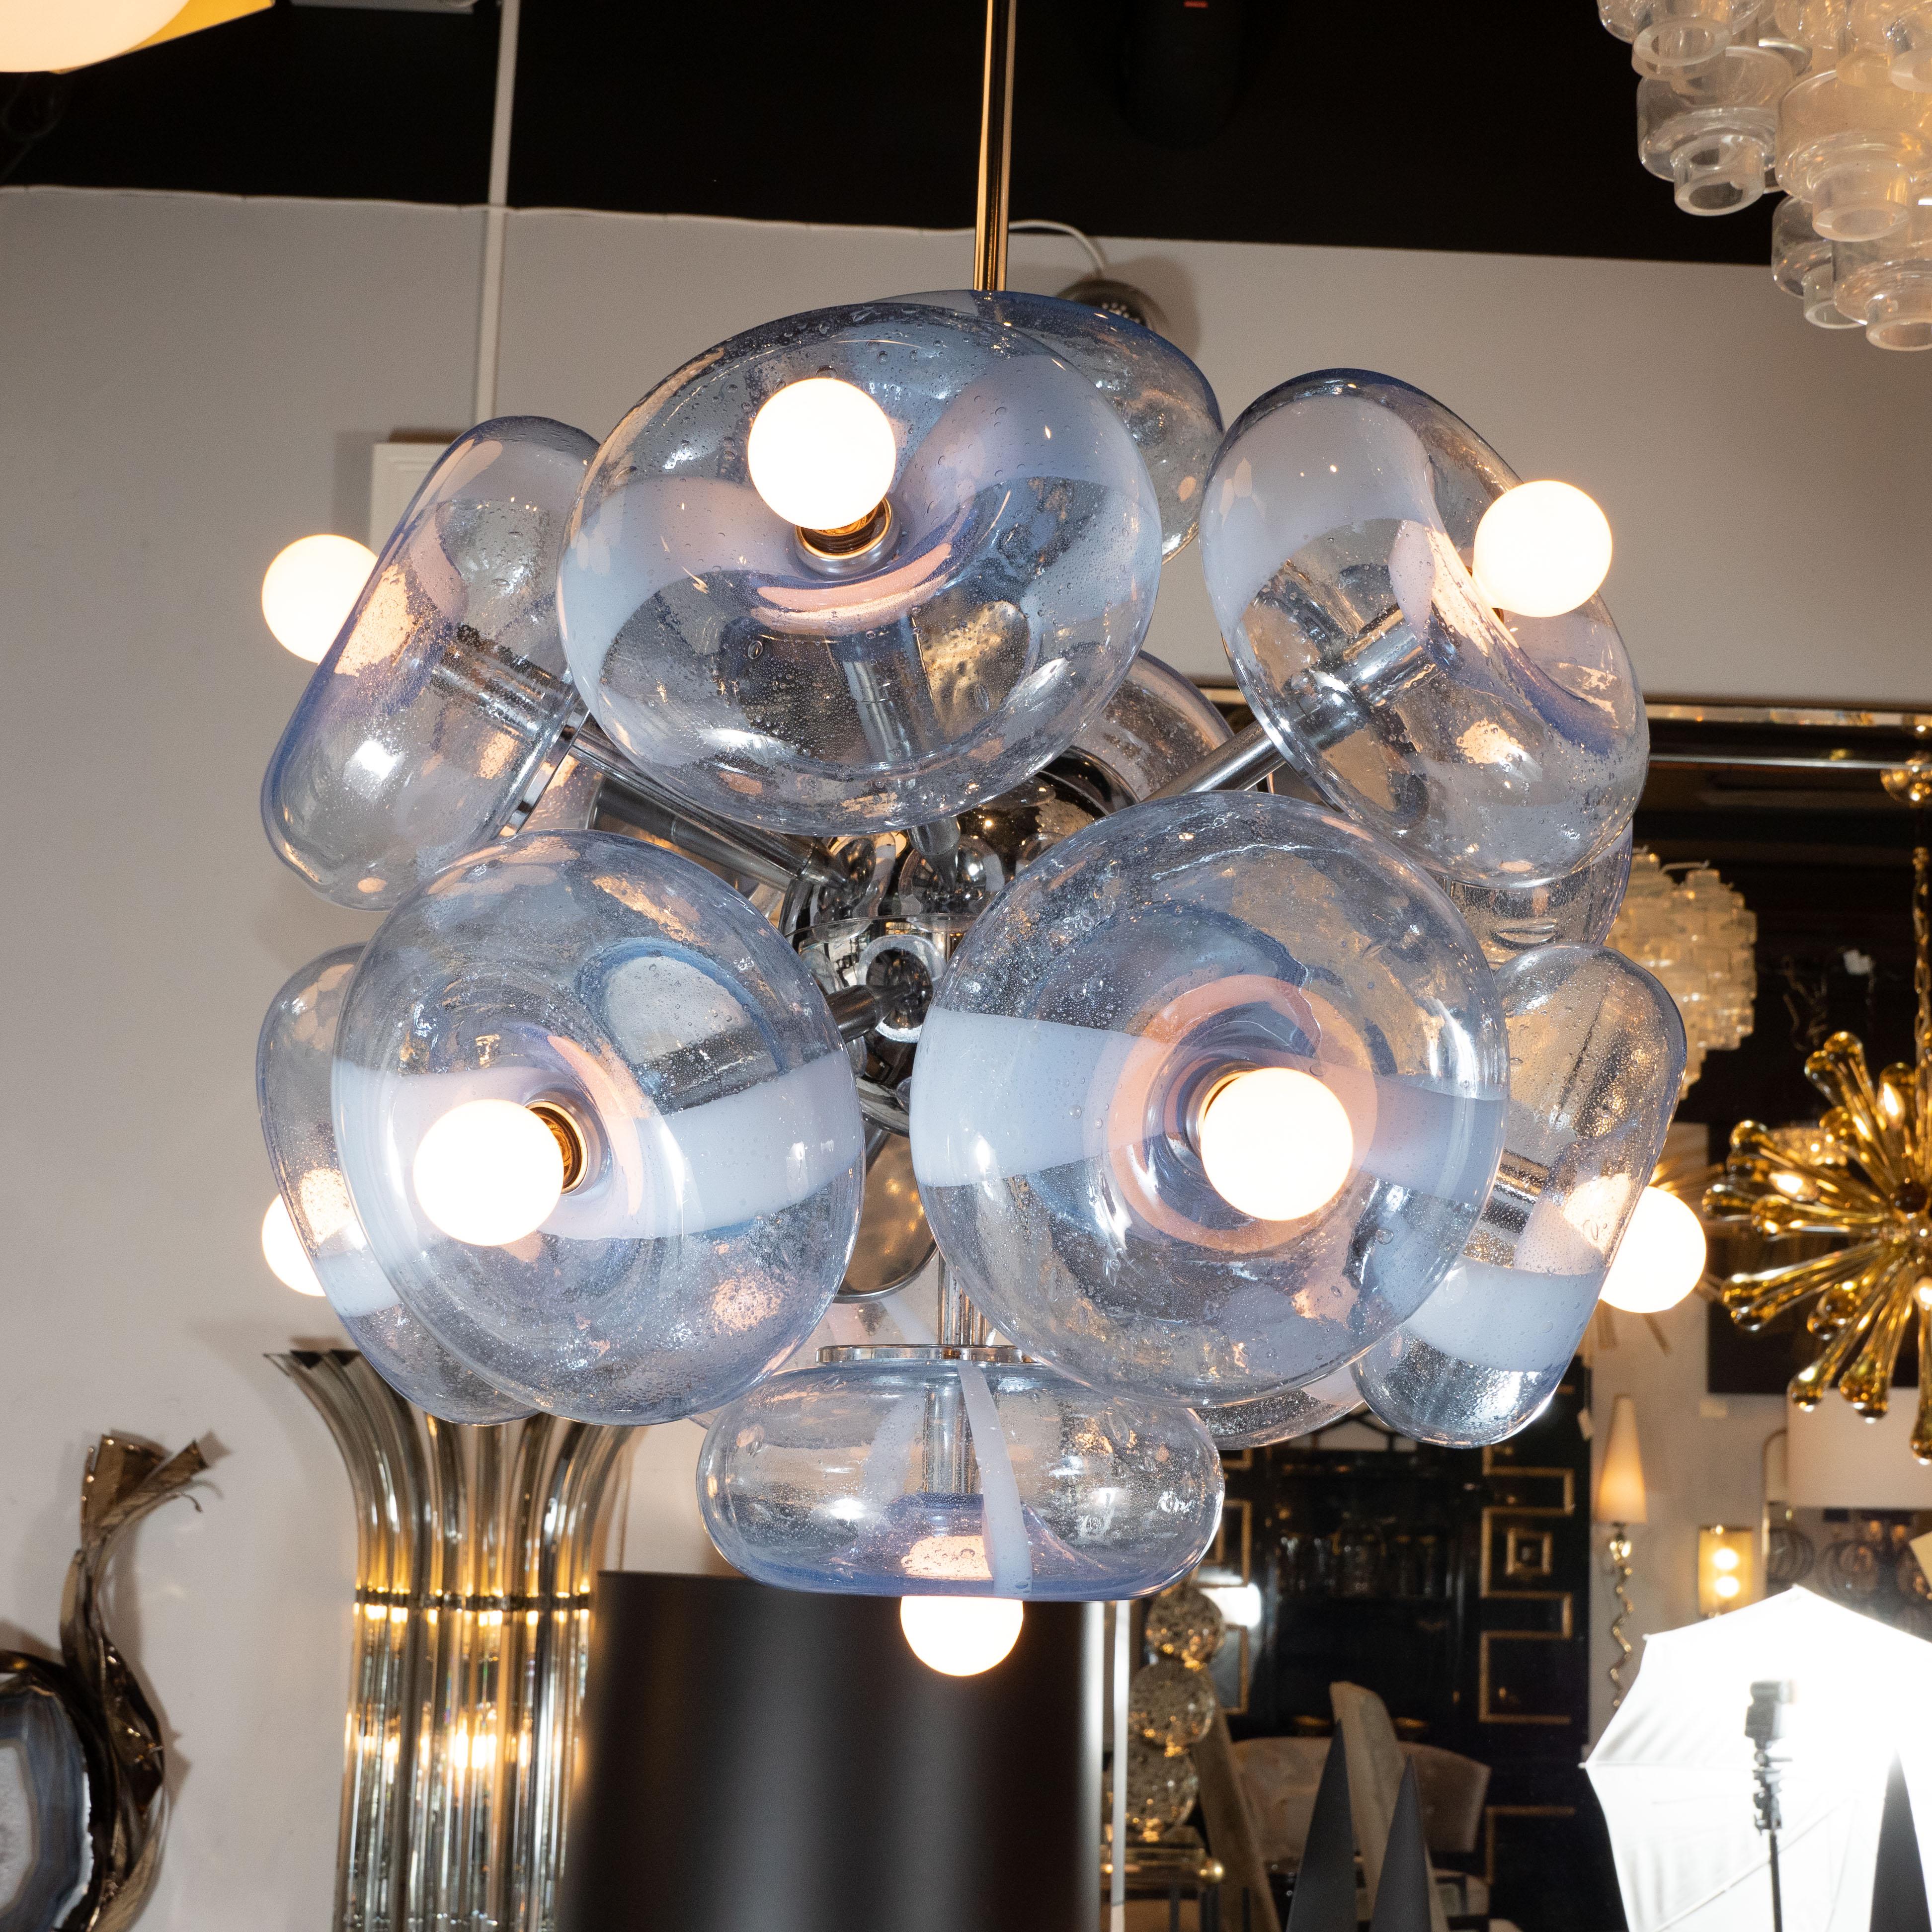 This stunning and graphic sputnik was realized in Italy, circa 1950. It features twelve torus shaped shades in hand blown Murano glass of a beautiful periwinkle shade- replete with an abundance of miniscule bubbles embedded within, suggesting